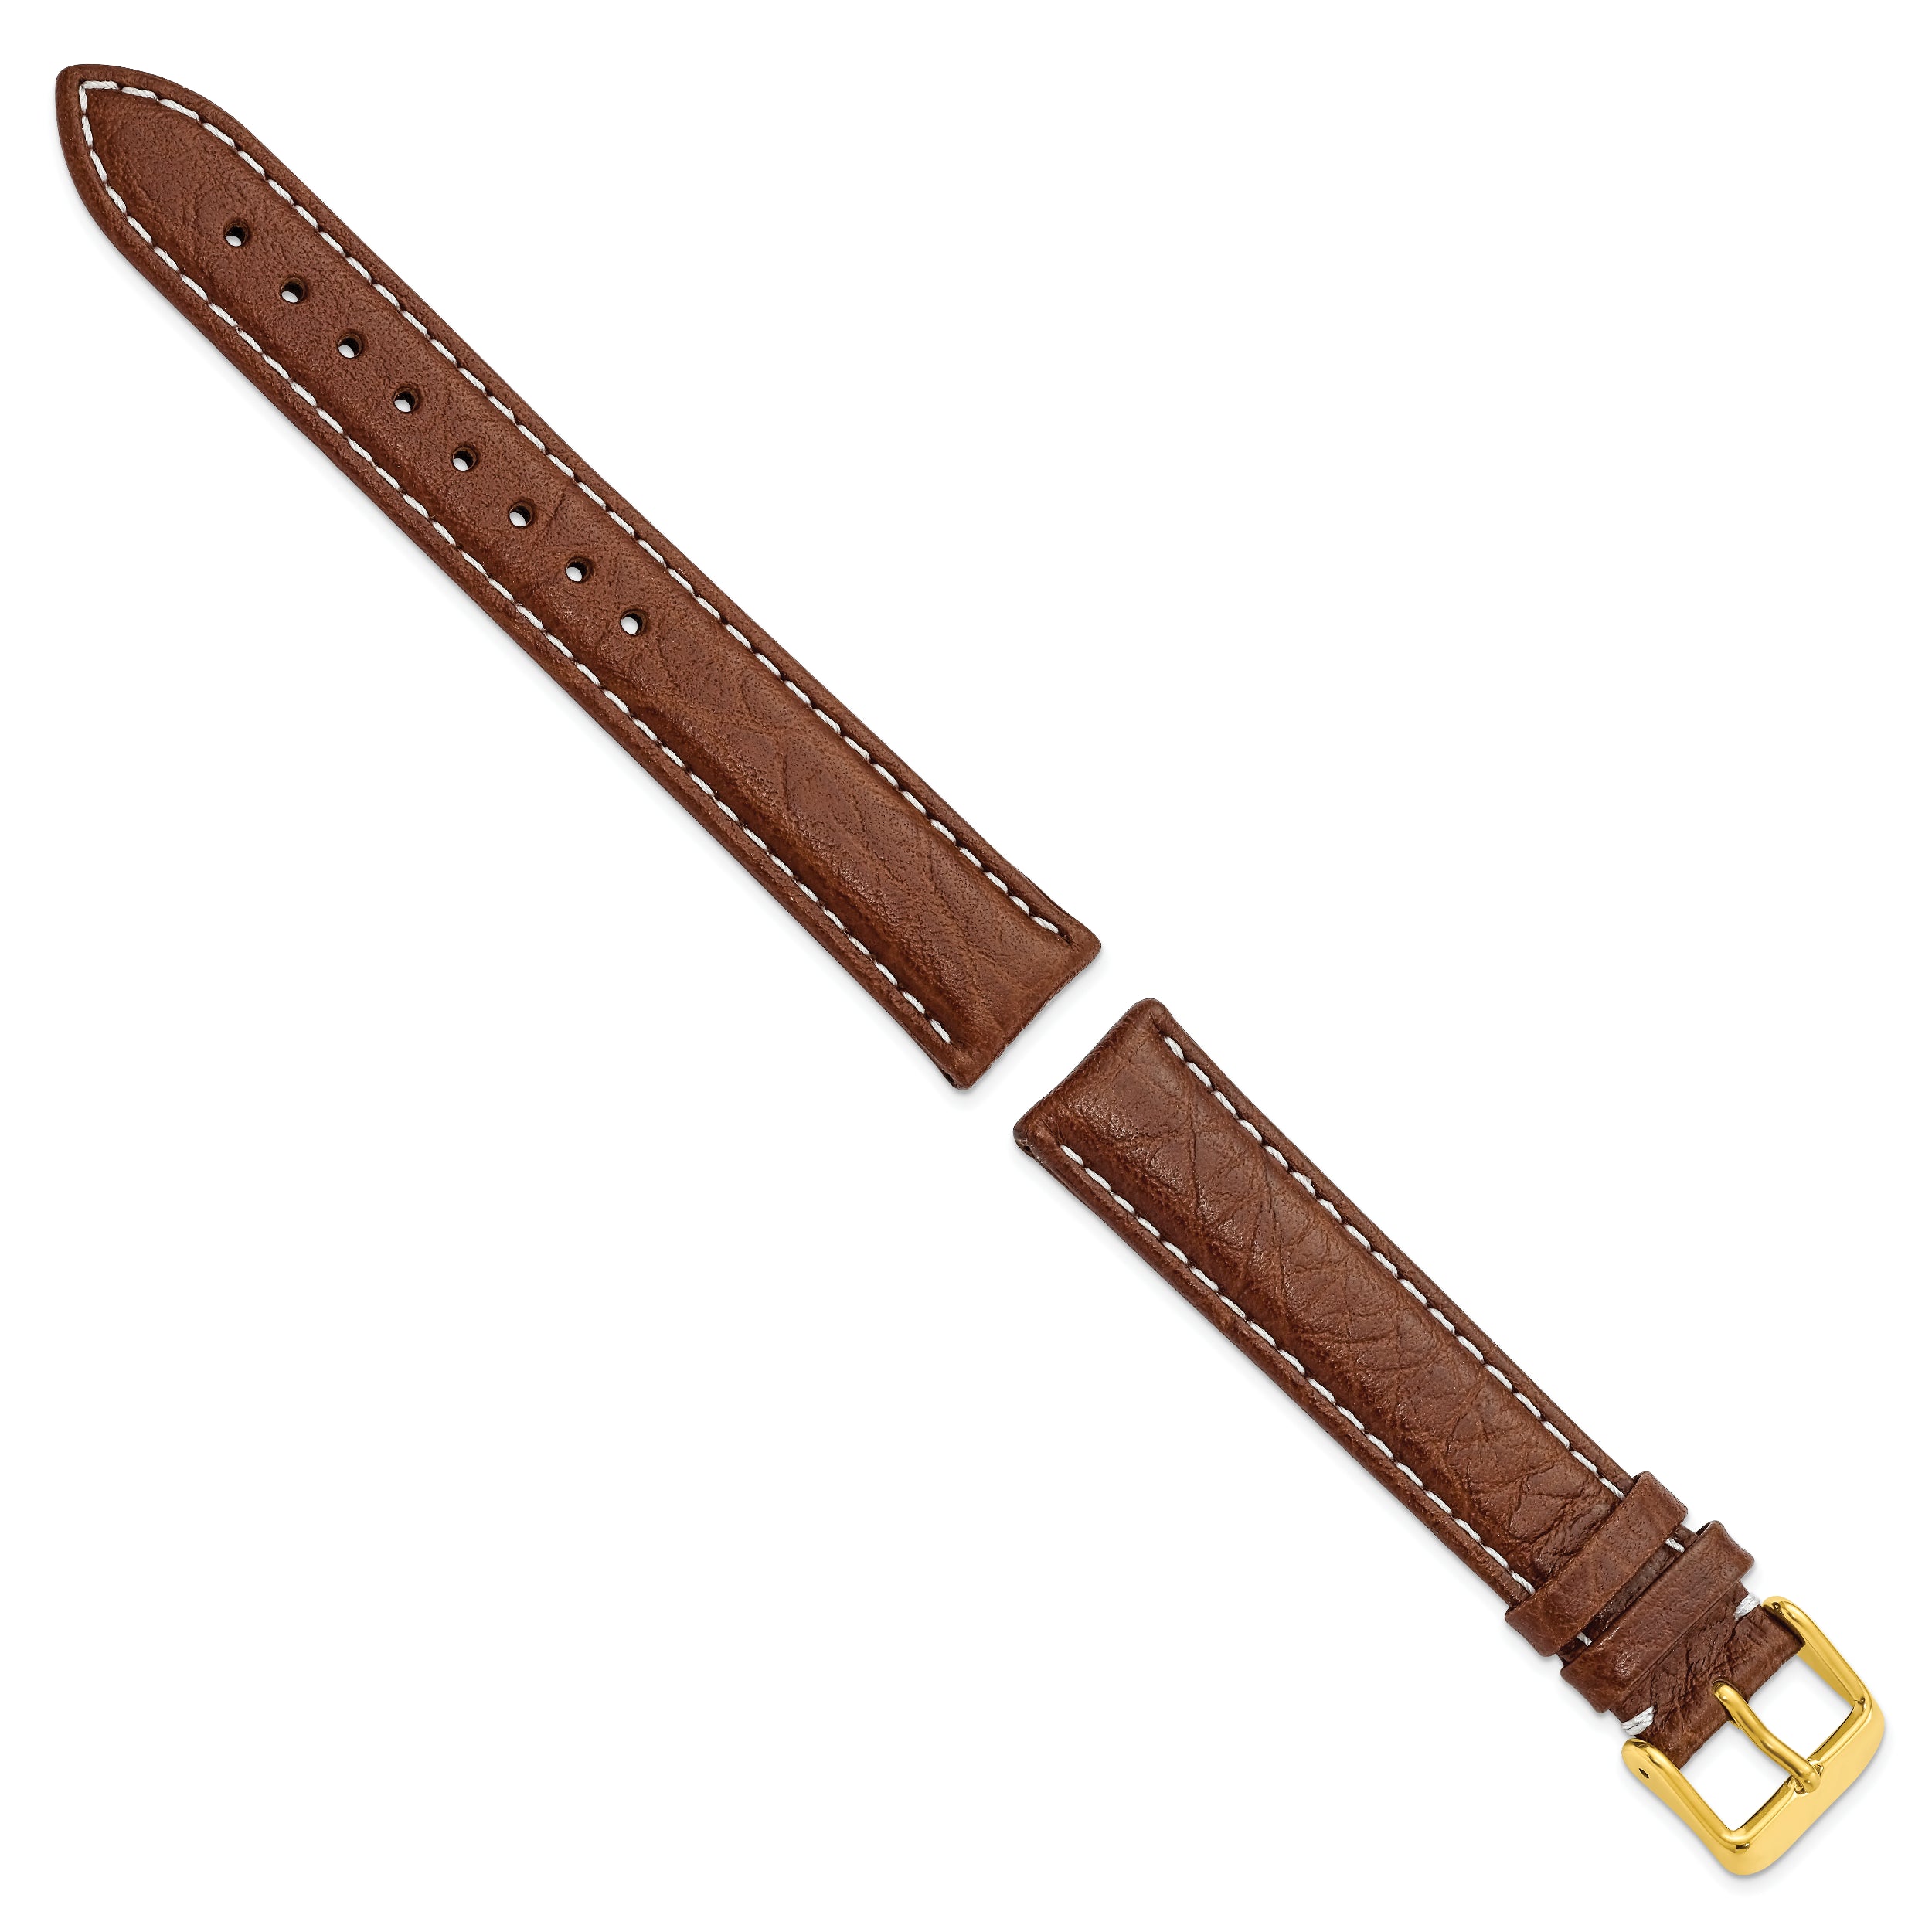 12mm Havana Sport Leather with White Stitching and Gold-tone Buckle 6.75 inch Watch Band